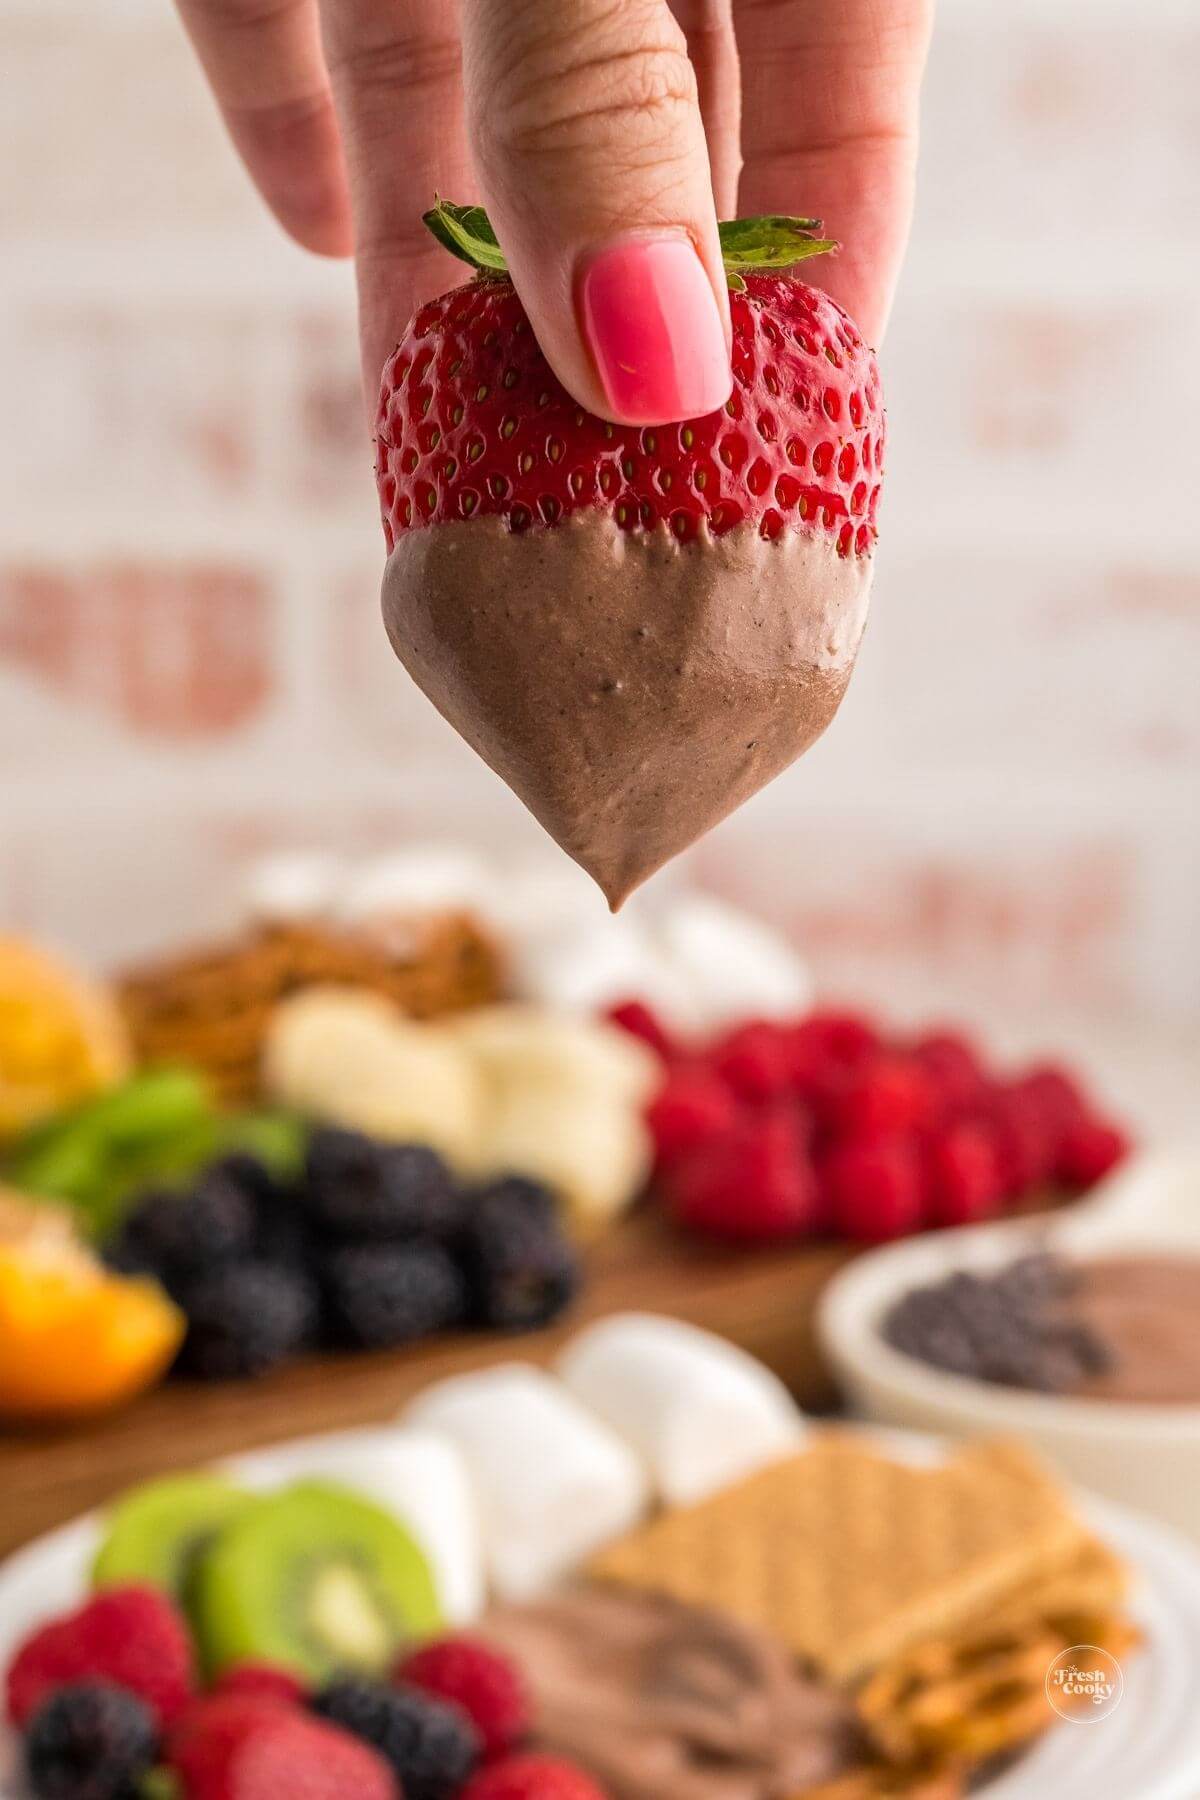 Hand dipping ripe strawberry into chocolate fruit dip.